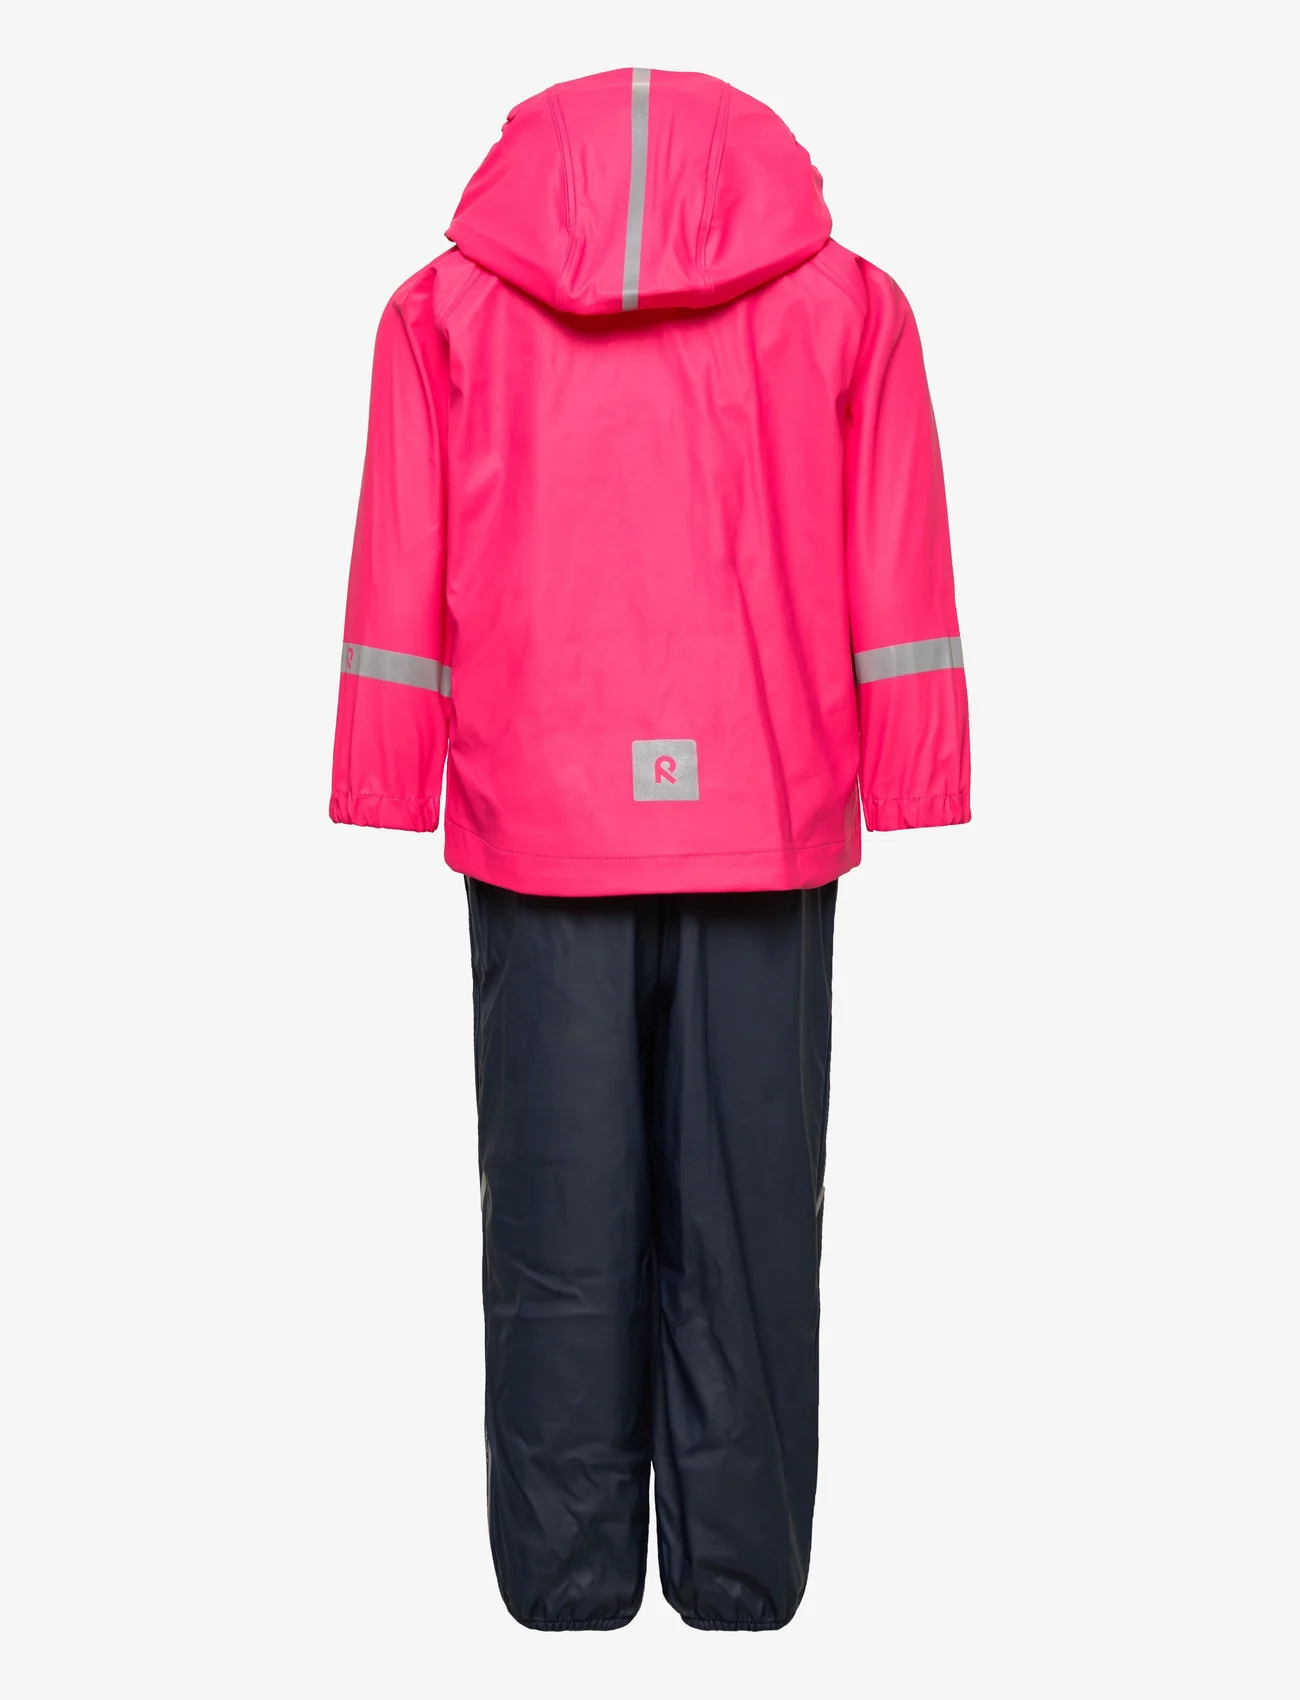 Reima - Rain outfit, Tihku - regensets - candy pink - 1